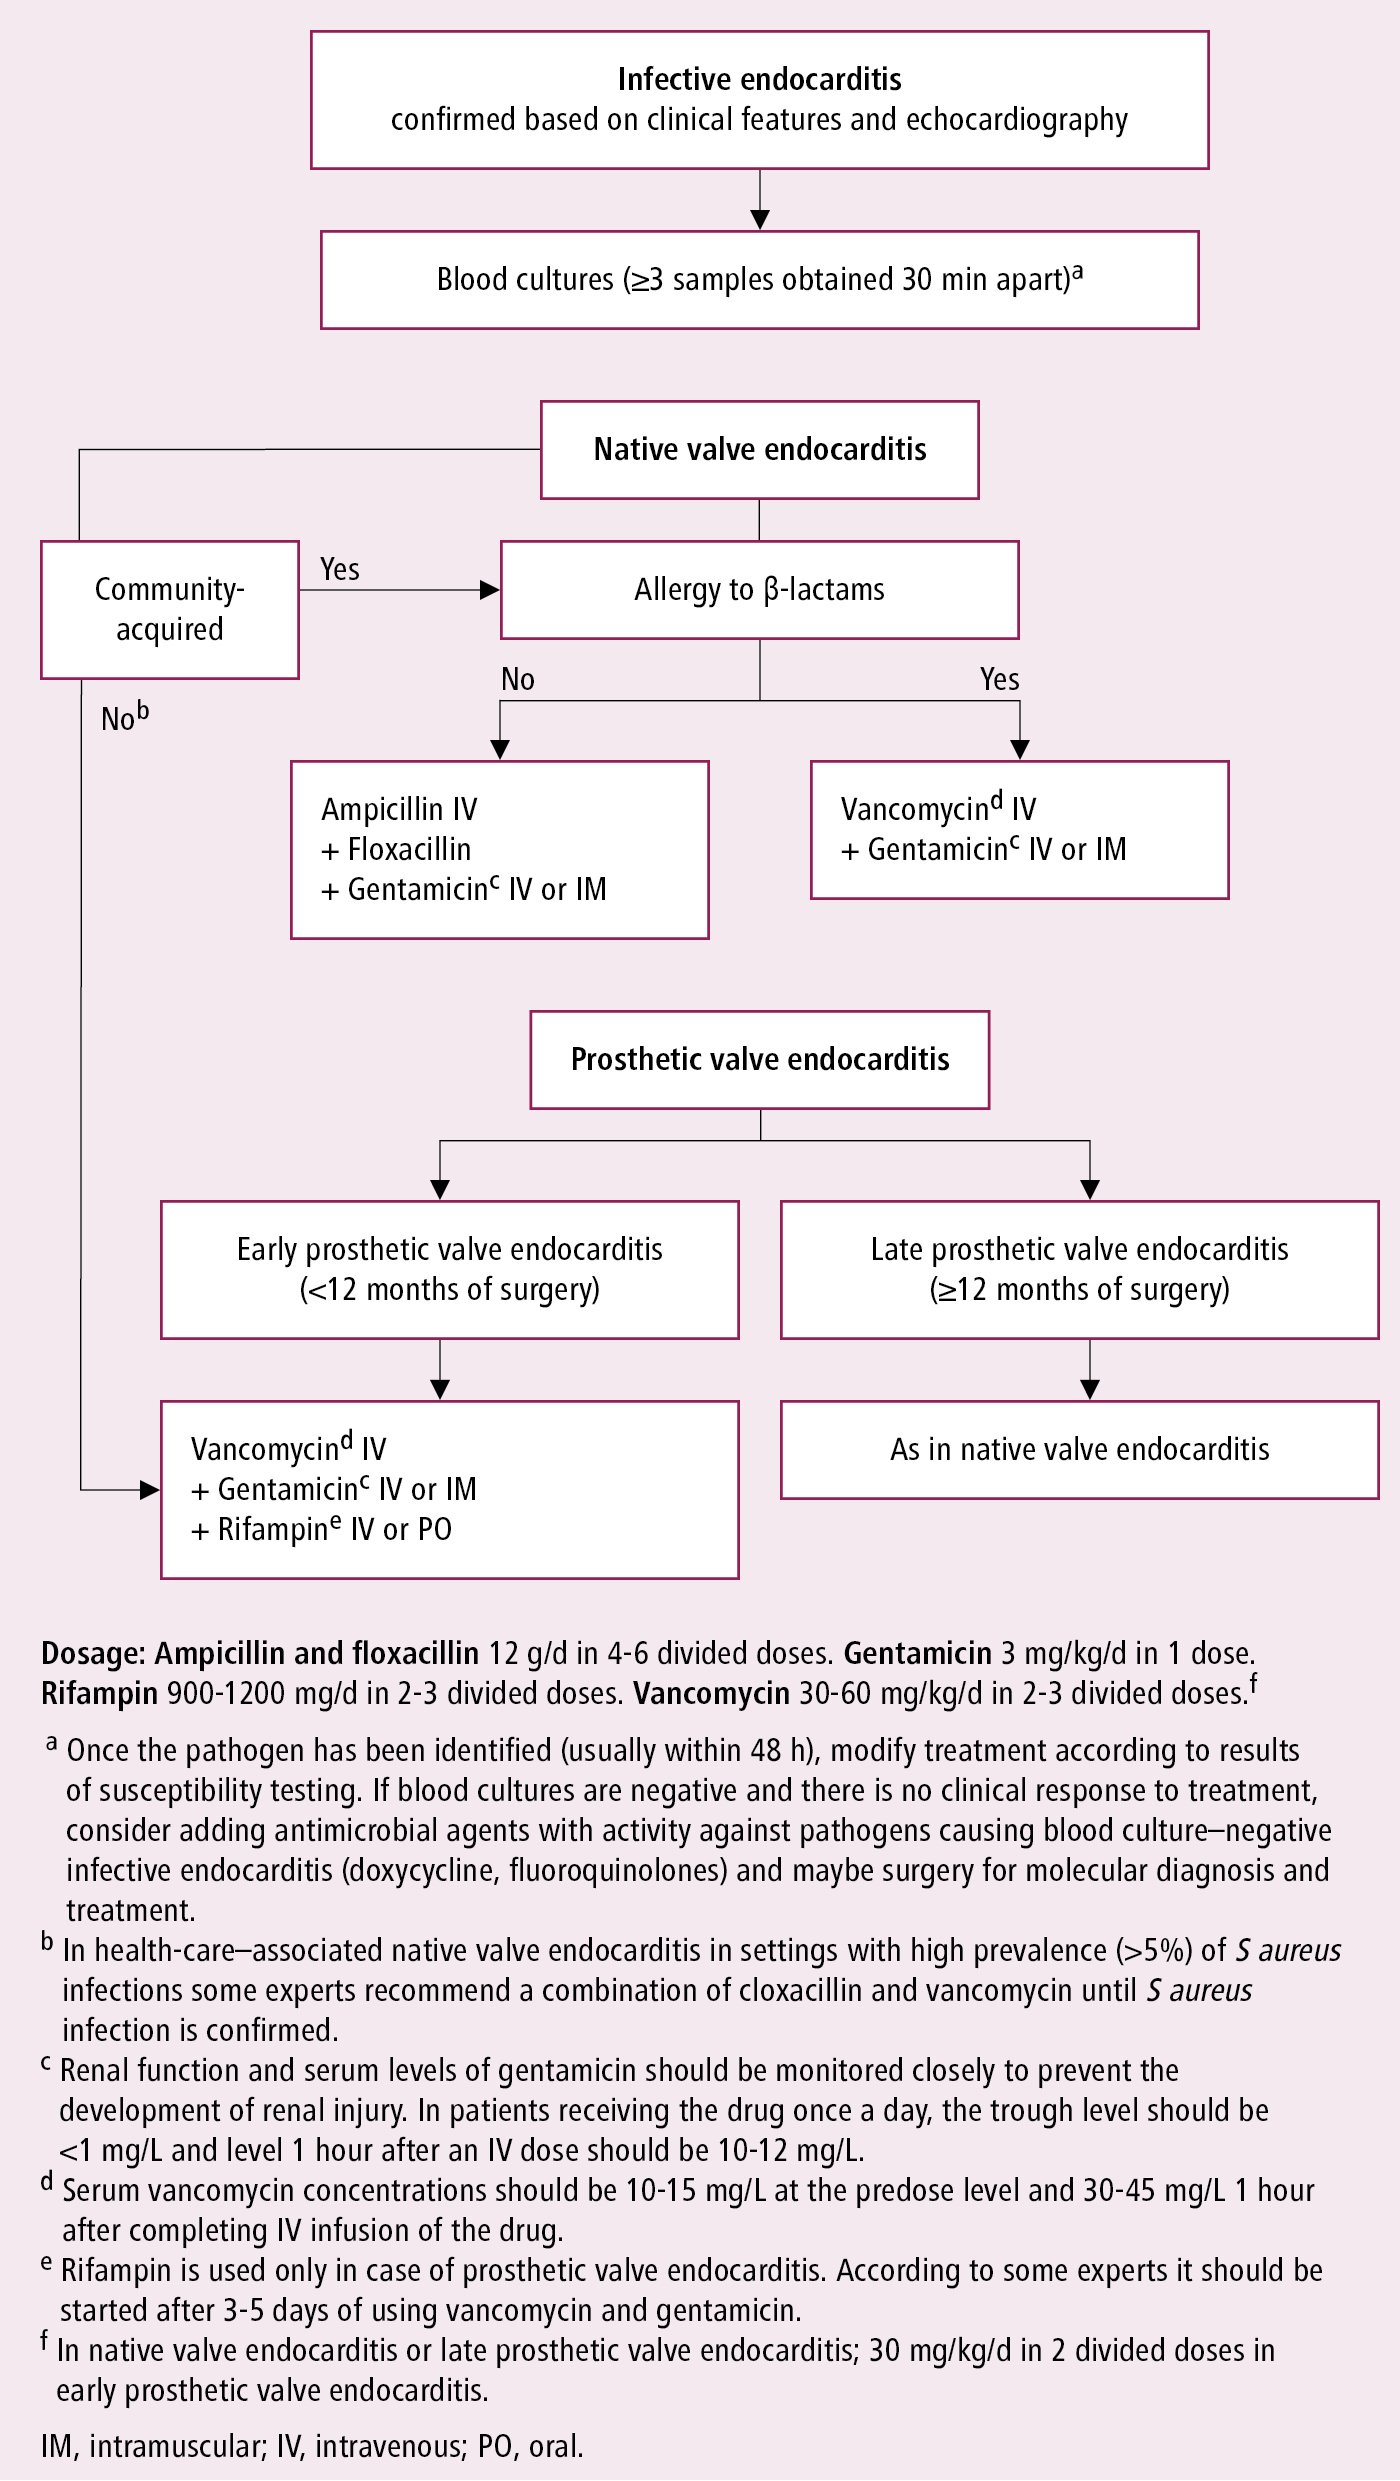 Figure 031_2062.  Empiric antibiotic treatment for infective endocarditis before pathogen identification and in the case of negative cultures.  Based on    Eur Heart J. 2015;36(44):3075-3128 .  